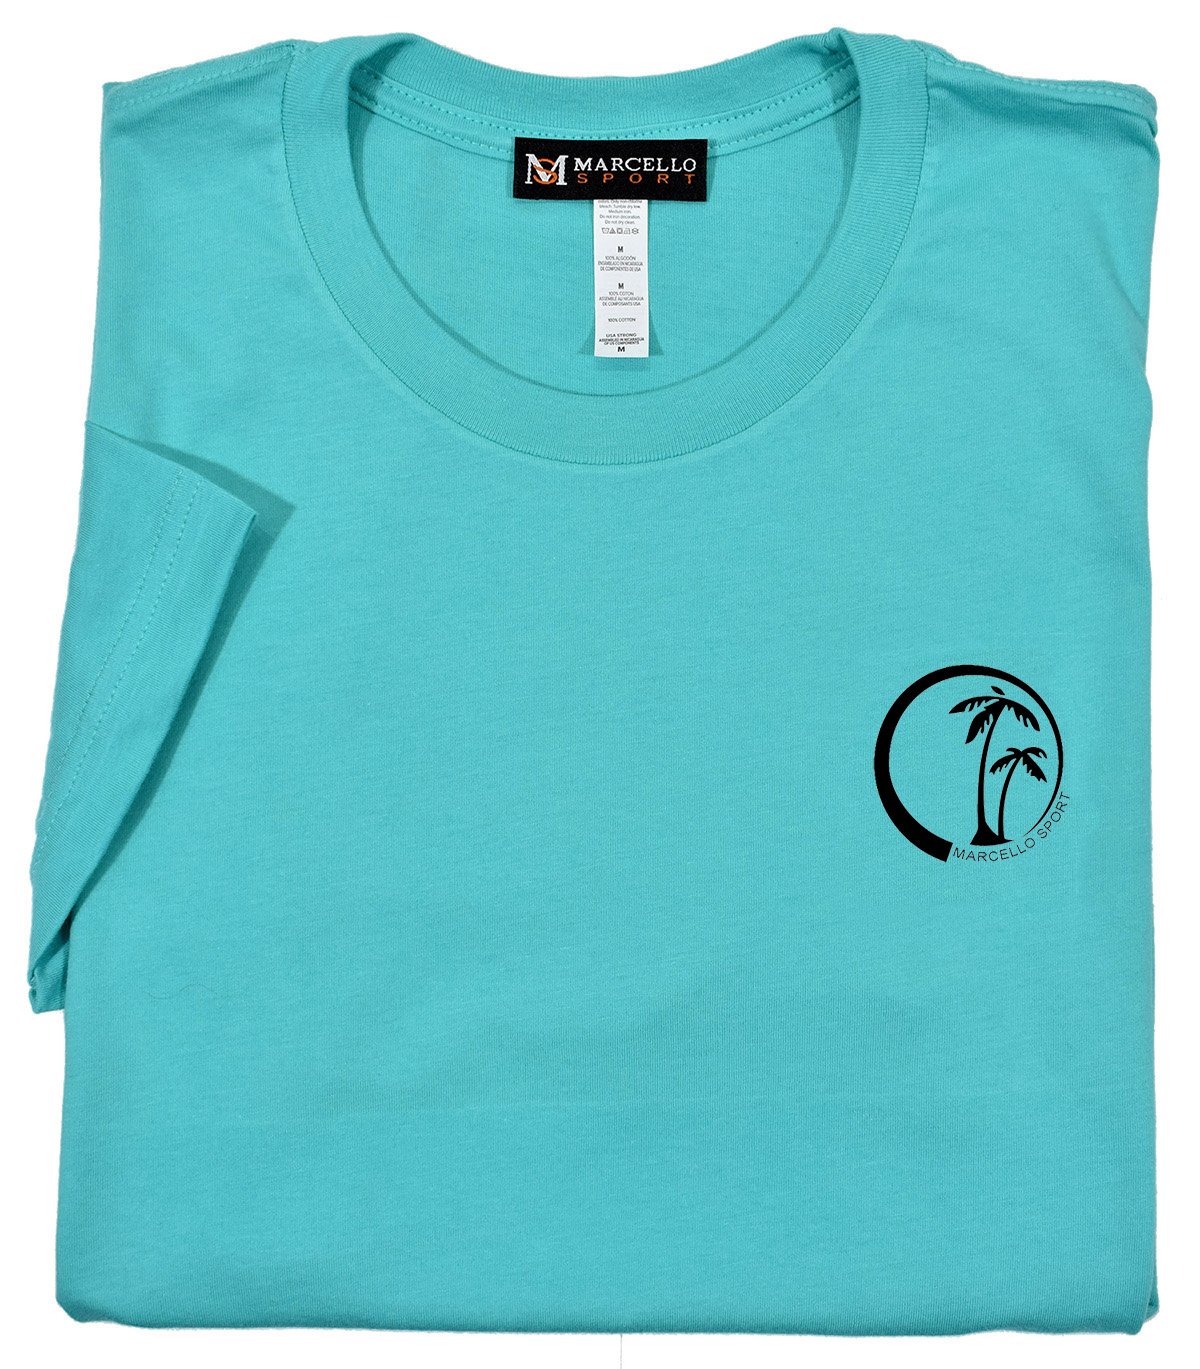 Marcello Caribbean Palm Tee  100% soft cotton, preshrunk. Ultra soft luxe cotton fabric. Contemporary fit, we suggest ordering one size up if between sizes or prefer a looser fit. Machine wash and dry.